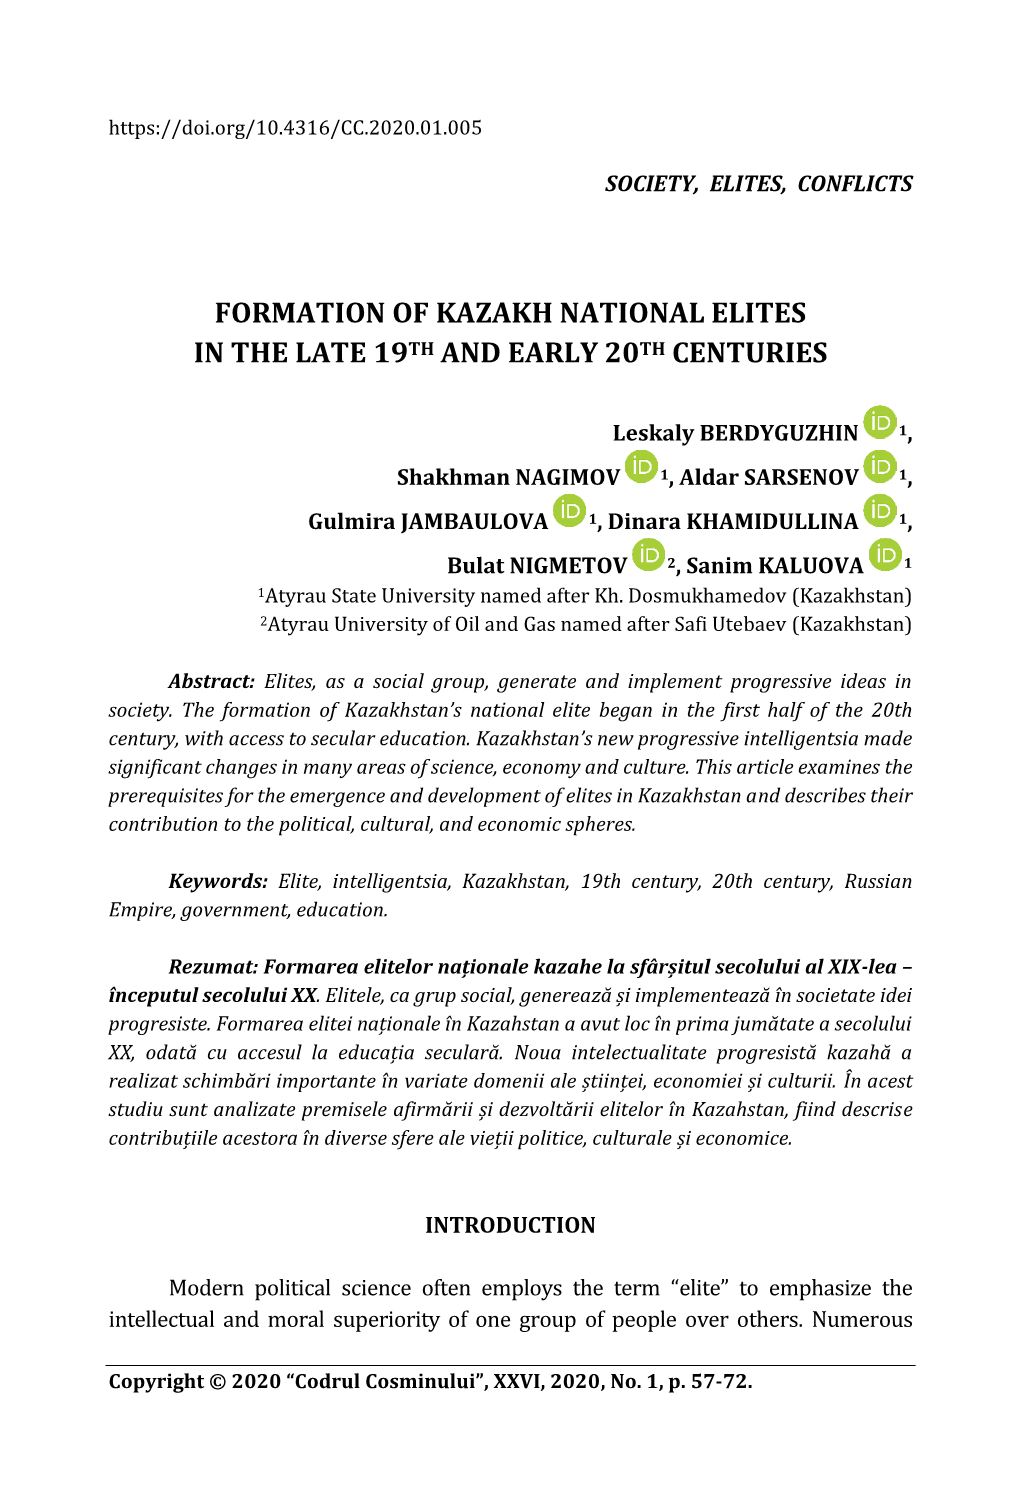 Formation of Kazakh National Elites in the Late 19Th and Early 20Th Centuries